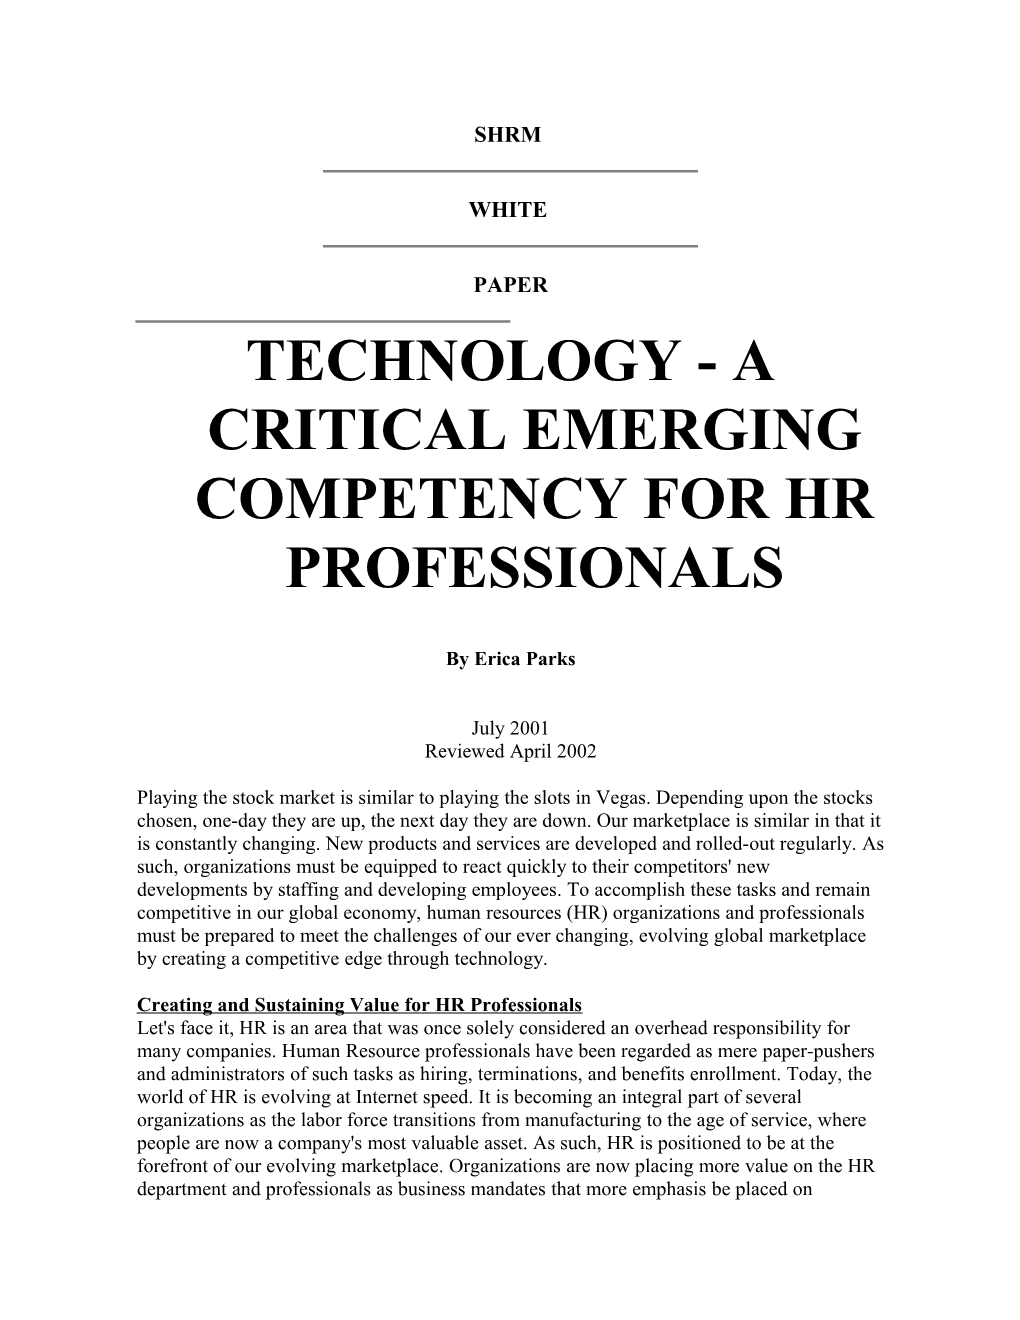 Technology - a Critical Emerging Competency for Hr Professionals